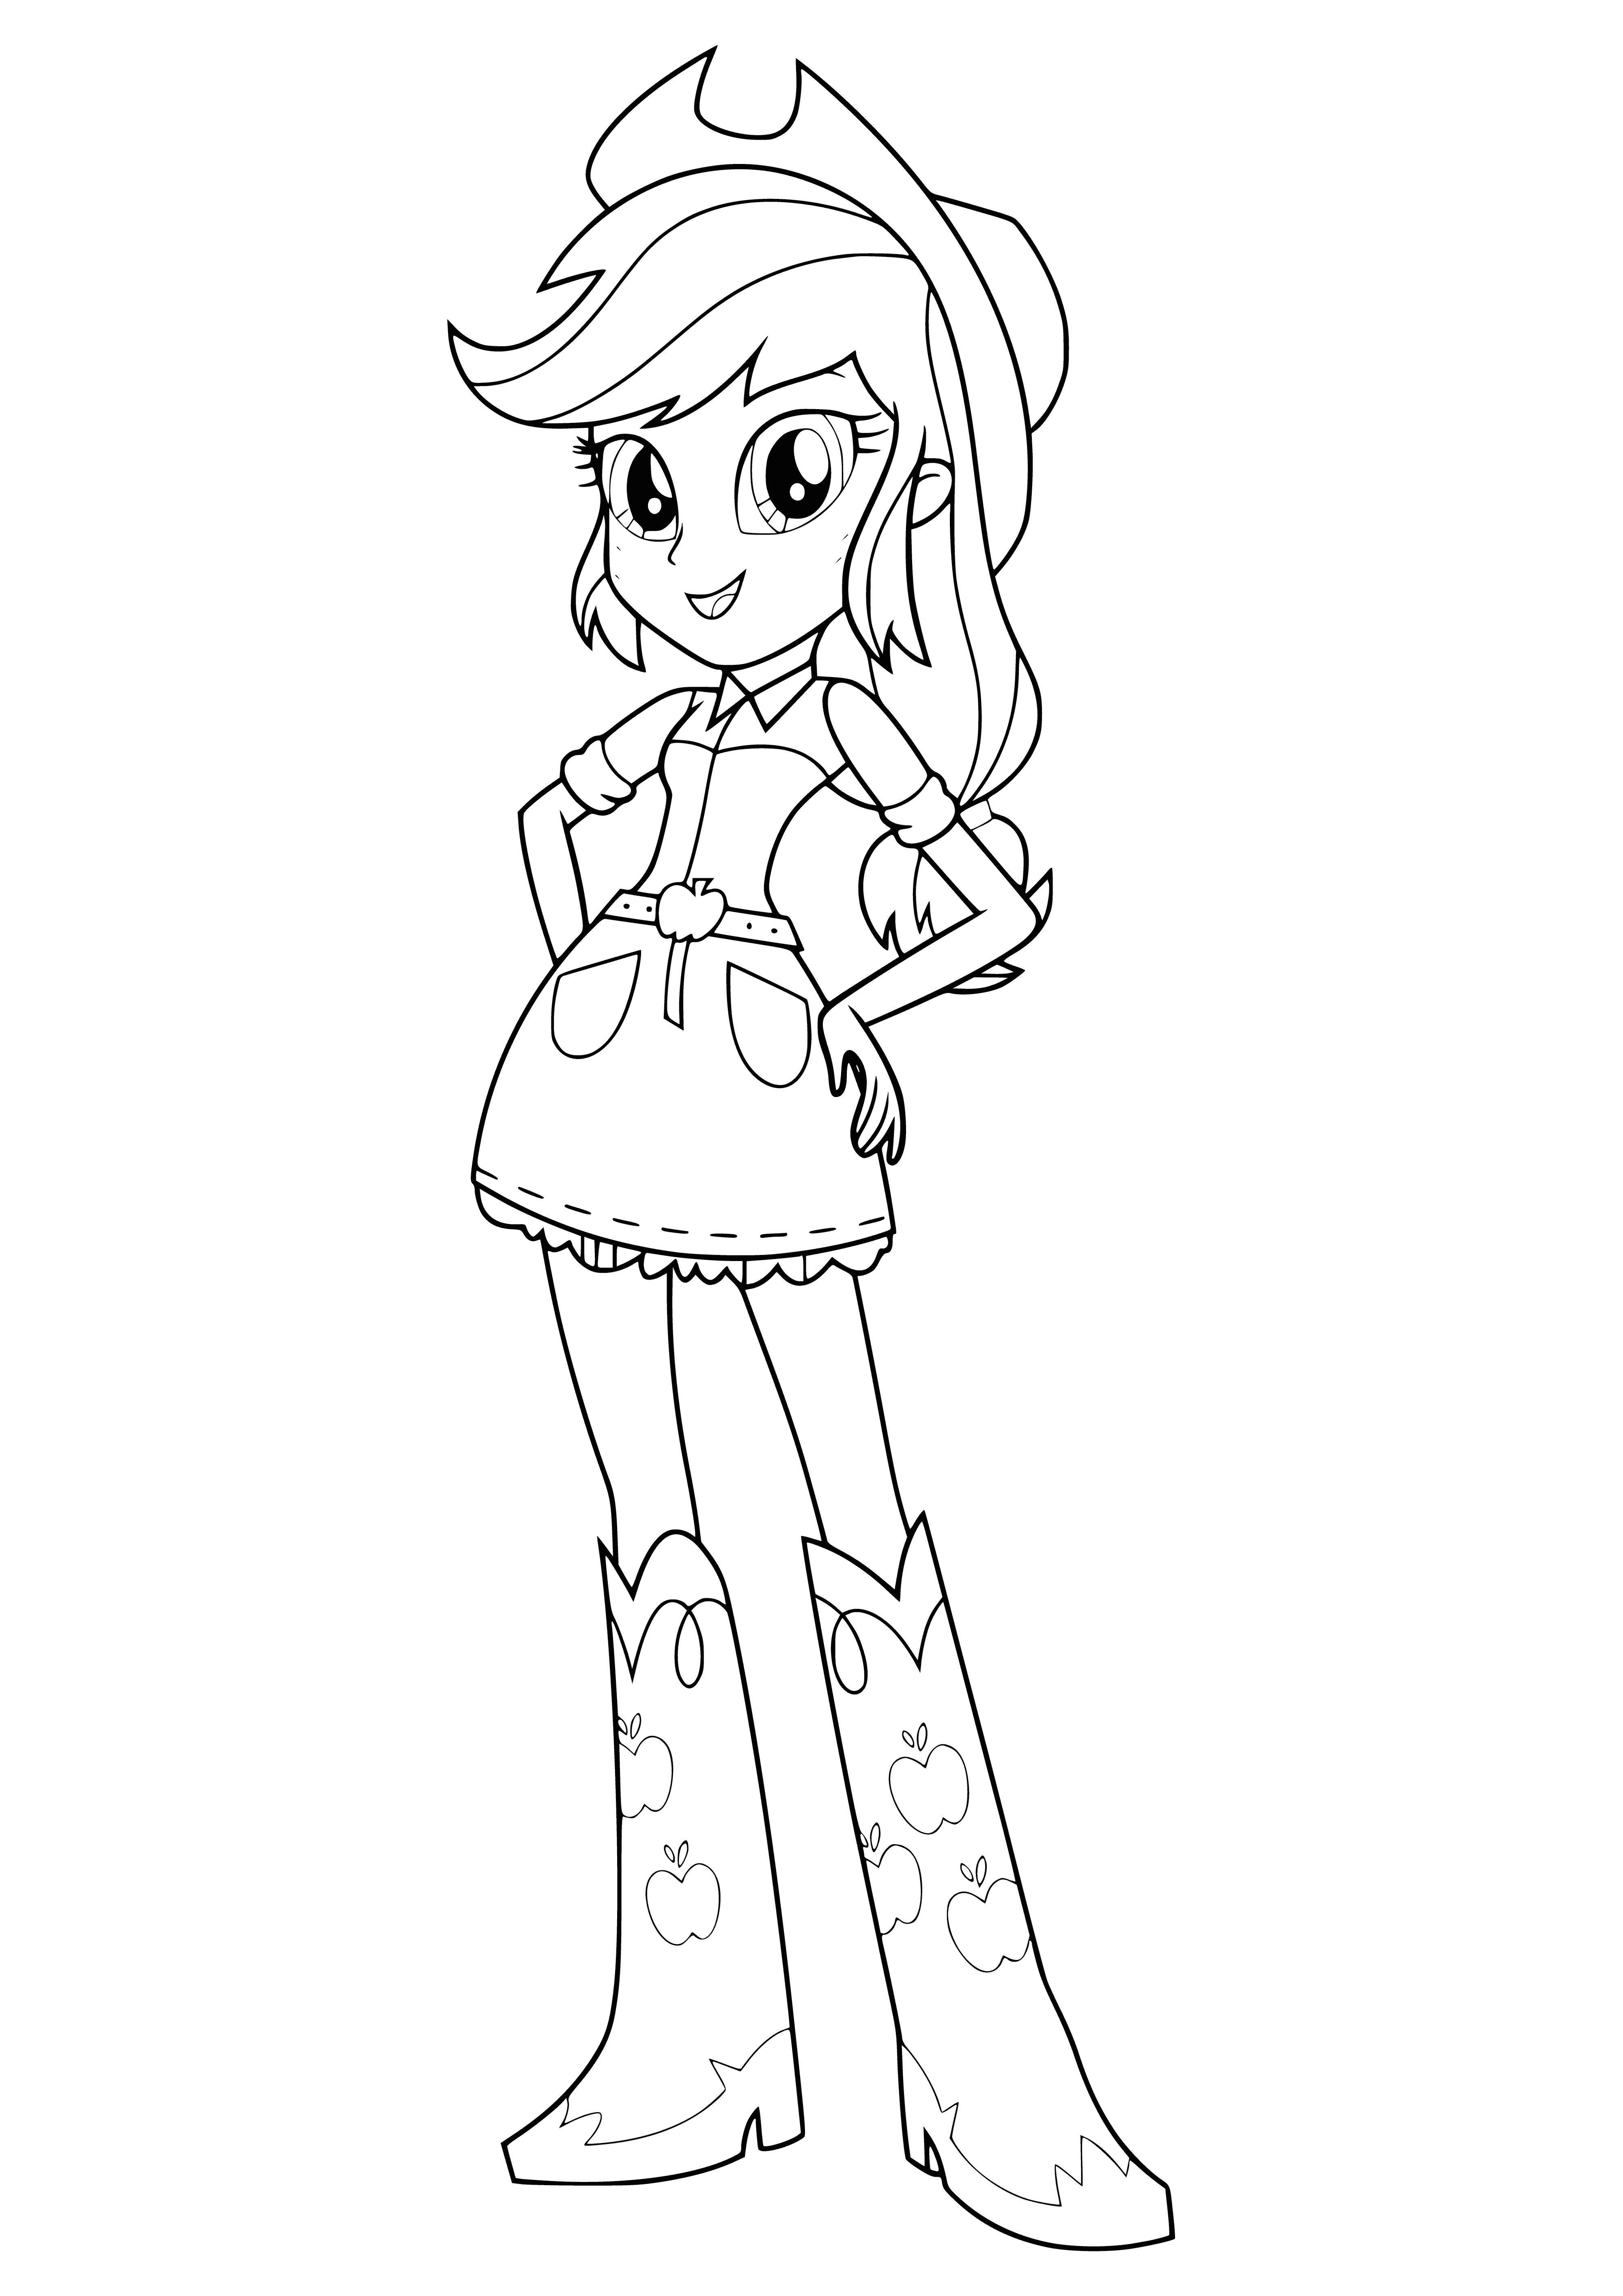 Applejack is a girl with long, straight orange hair, a cowboy hat, plaid skirt, vest, boots & backpack.